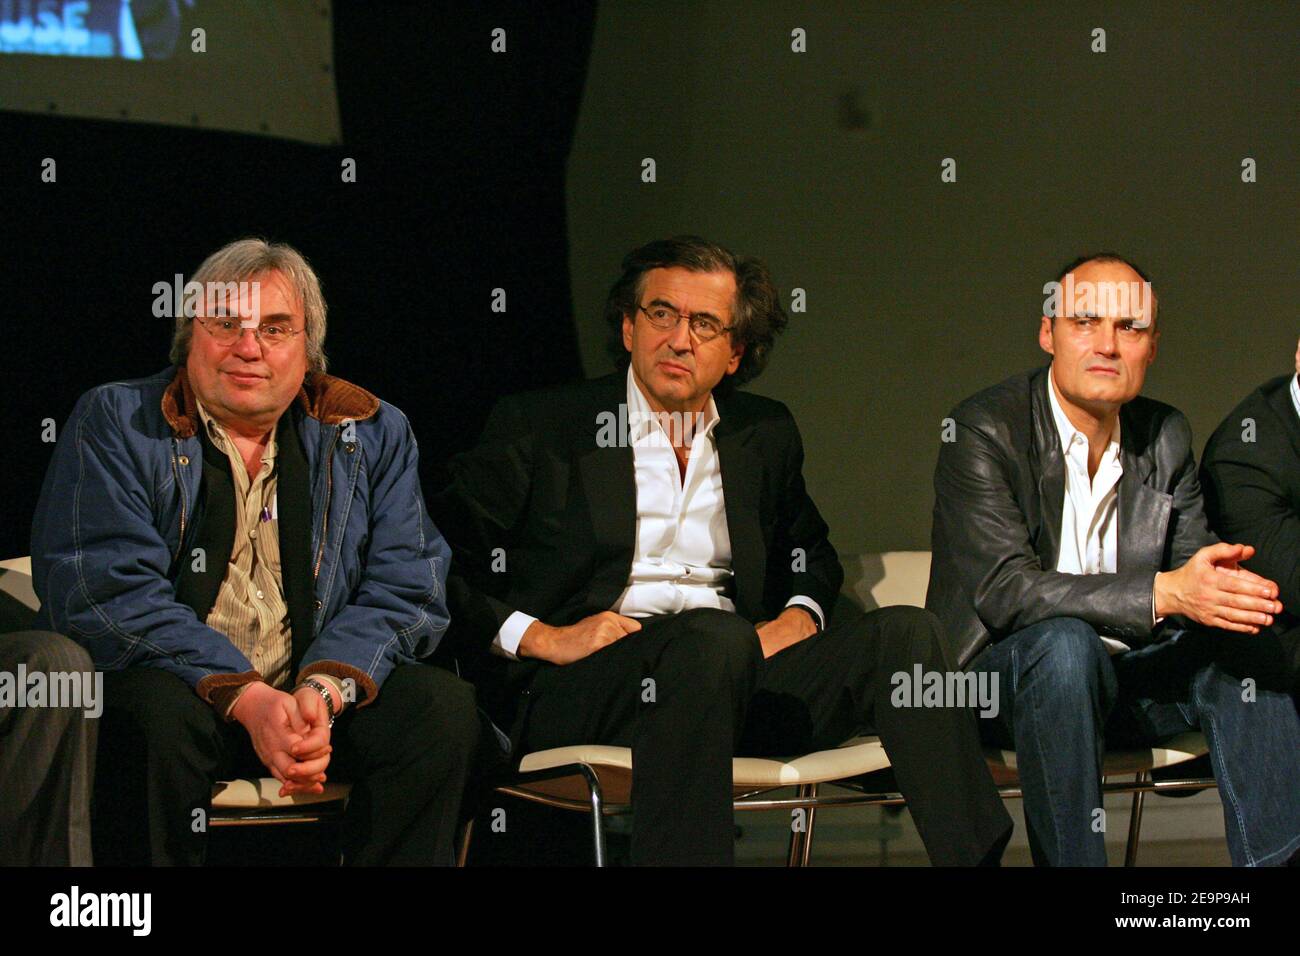 Robert Redeker, Bernard-Henry Levy (French writer) and Philippe Val (Charlie Hebdo's chief editor) during the meeting to support Robert Redeker (French Philosophy teacher who has been forced into hiding after making controversial remarks about the Prophet Muhammad and received death threats) at the Mermoz Hall in Toulouse, France, on november 15, 2006. Photo by Manuel Blondeau/ABACAPRESS.COM Stock Photo